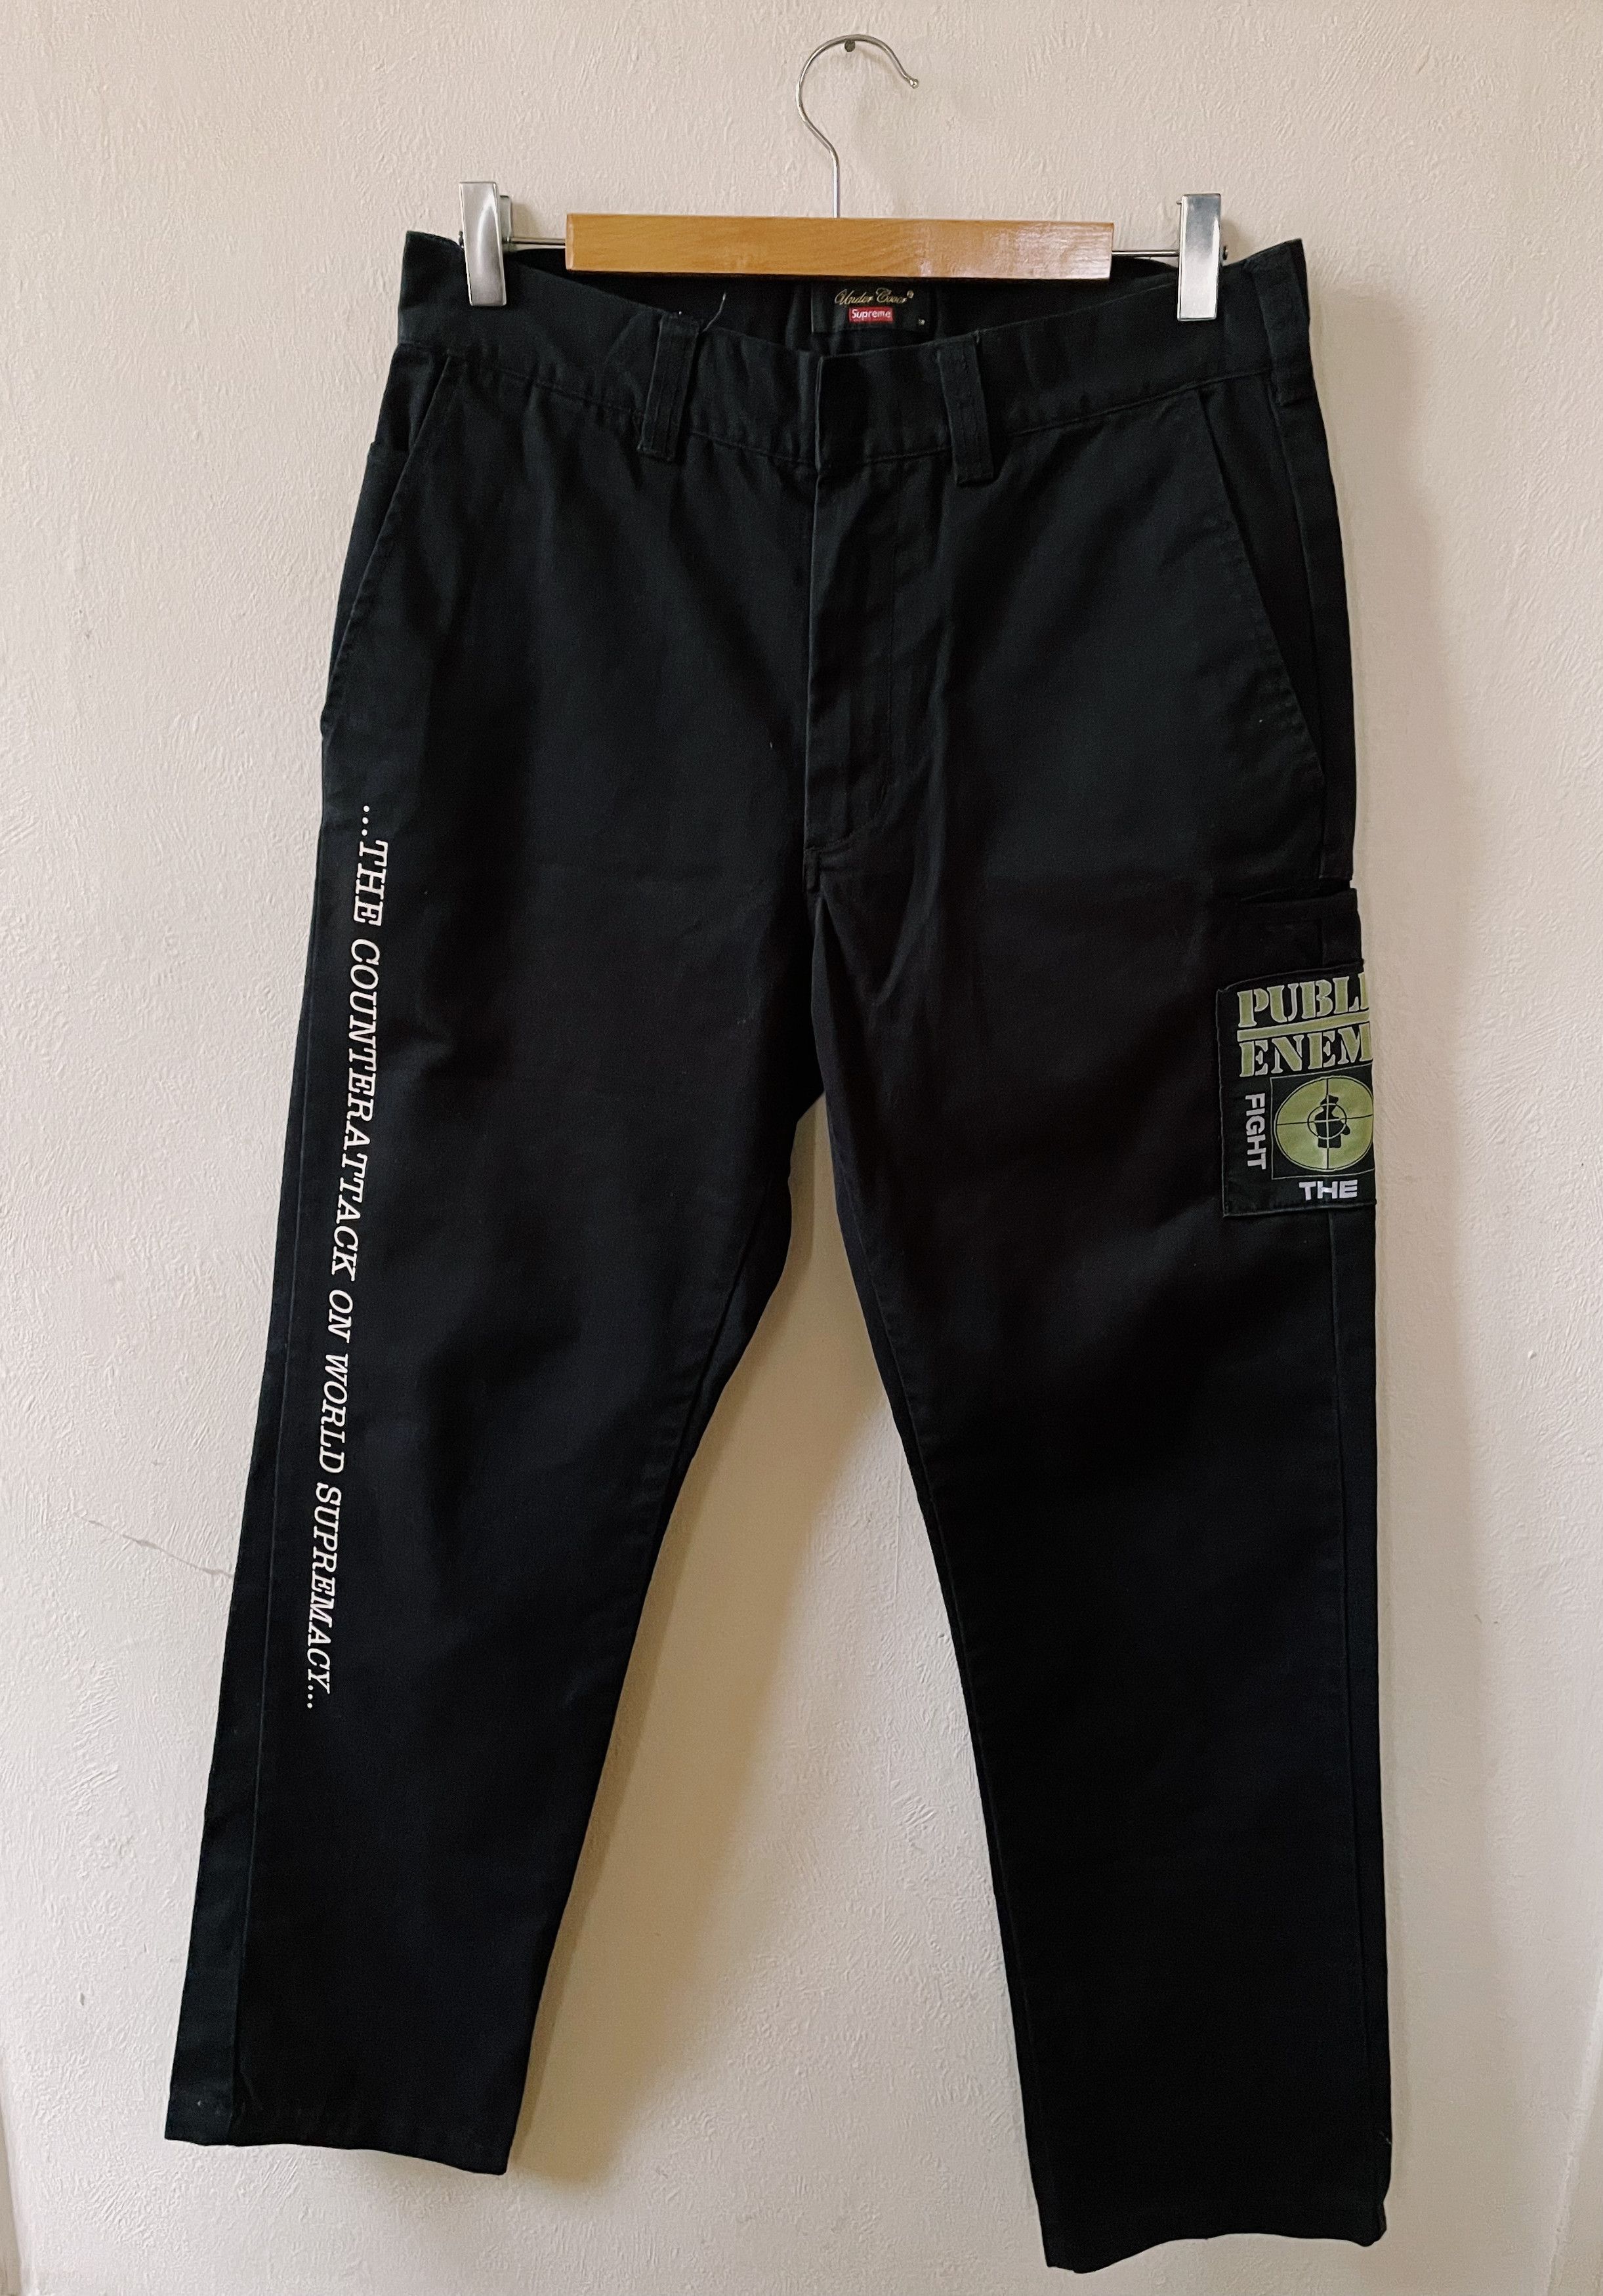 Supreme Undercover Work Pants | Grailed